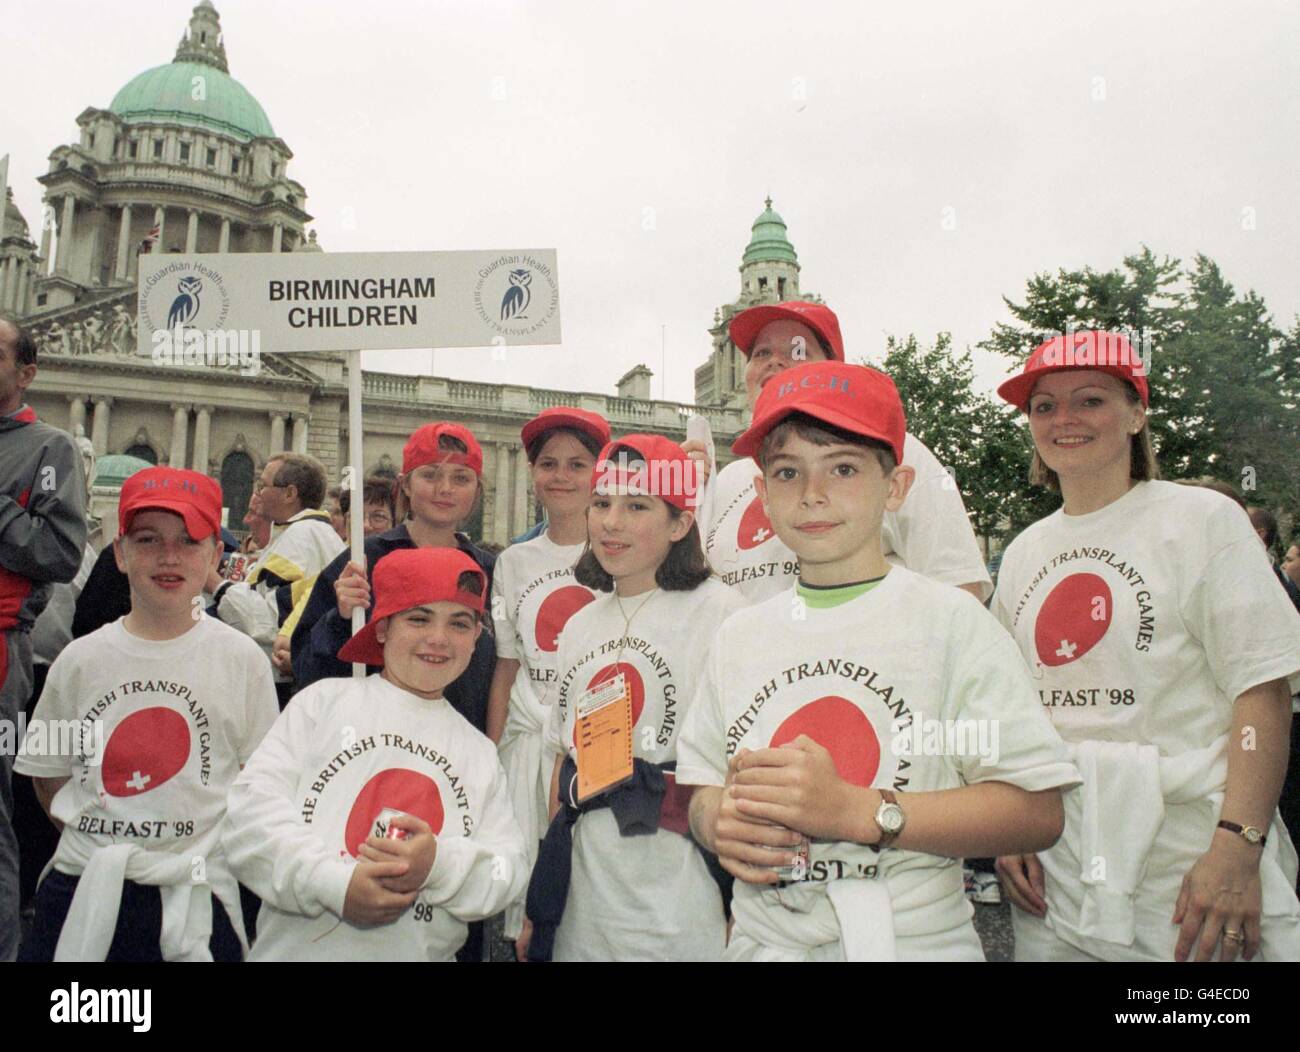 GUARDIAN HEALTH BRITISH TRANSPLANT GAMES, Belfast July 30th - August 2nd 1998 Birmingham Childrens Team at the Opening Ceremony in front of Belfast City Hall for the Guardian Health Transplant Games. The children are L to R: FRONT ROW Craig Hinman(10), Lee Corbet,(10) Hannah Corbet (11) Reuben Collinson (8) BACK ROW Becky Ford (15) Nicki Erskine (12) Christine Dempsure (16) and Team Manager Rosie Jones Pic FREE More information from Transplant Games Press Office Tel: 01232 787719 Stock Photo